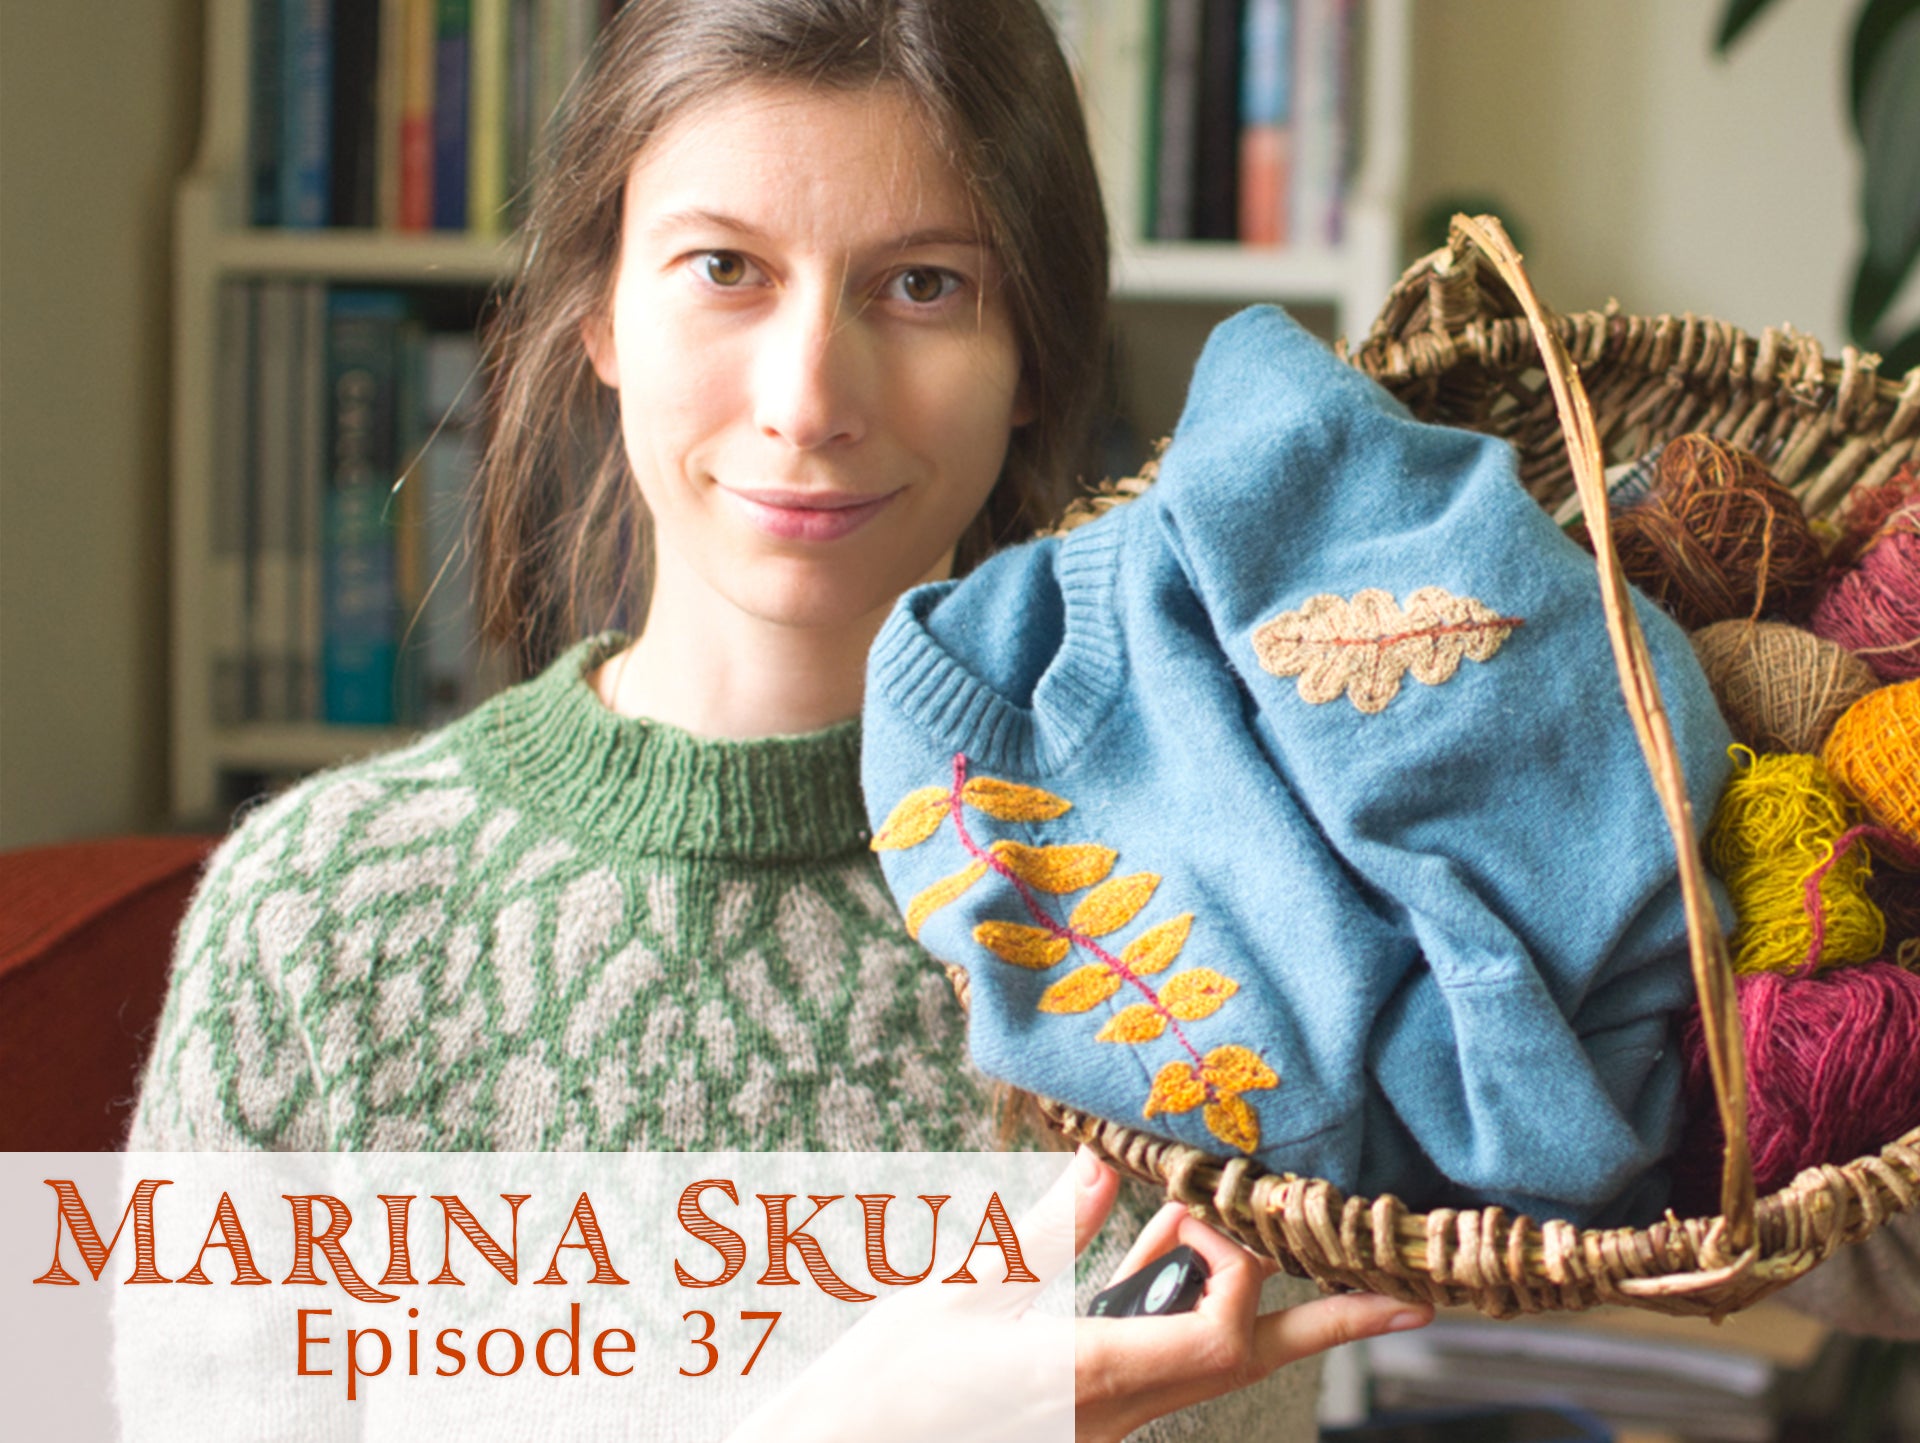 Episode 37 of the Podcast – Embroidering autumn leaves, knitting texture and cables, playing with yarn